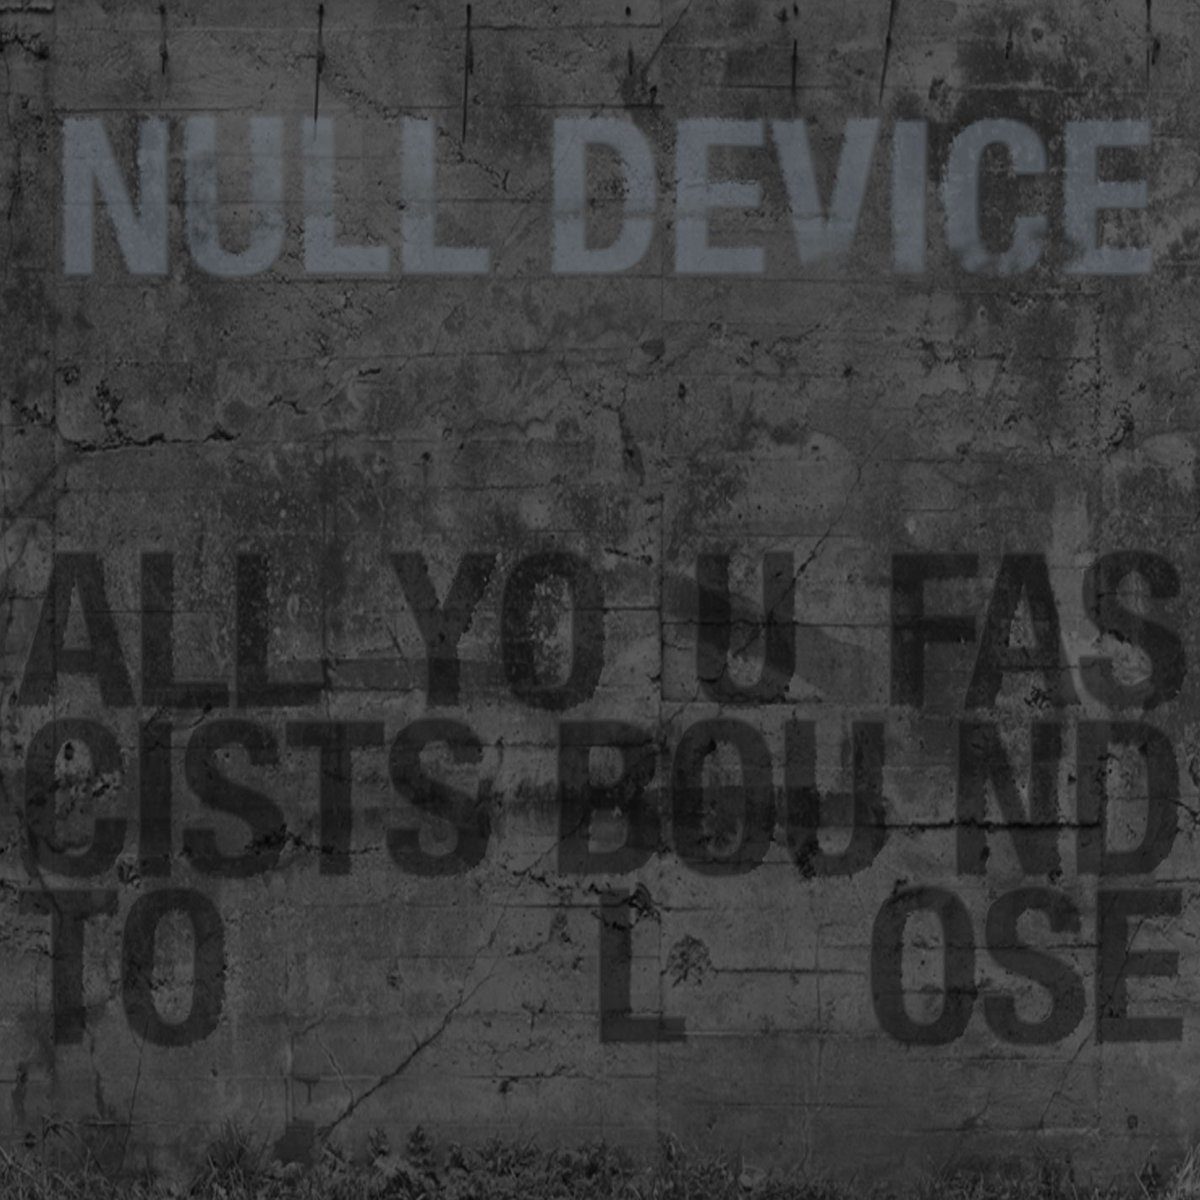 ‘All You Fascists Bound to Lose’, by Null Device